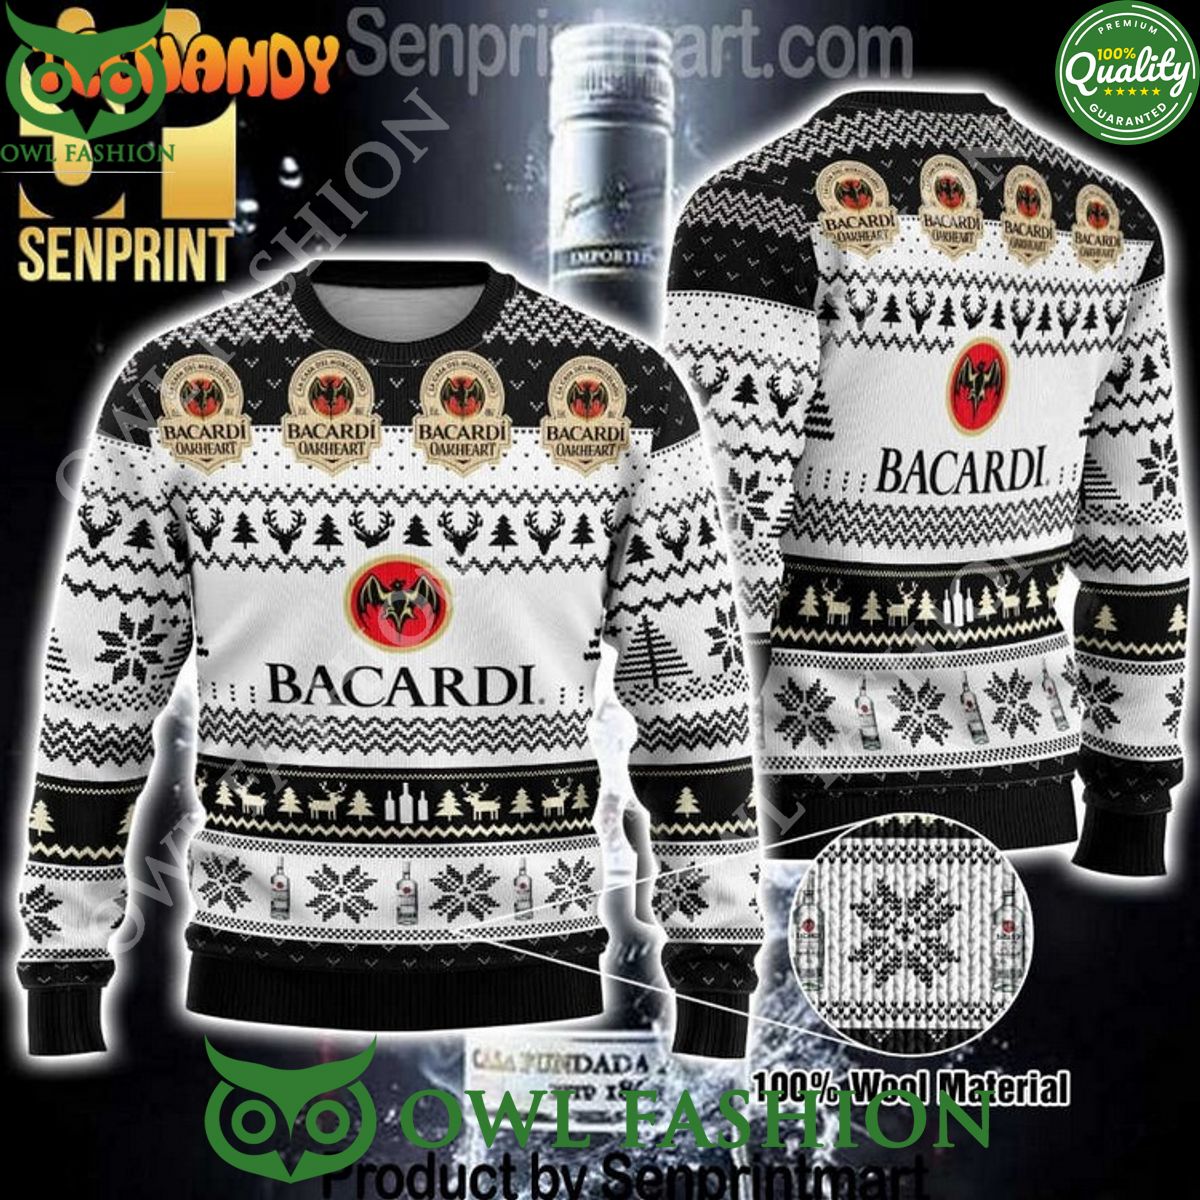 Bacardi Wine Chirtmas Gifts Full Printing Knitted Ugly Sweater